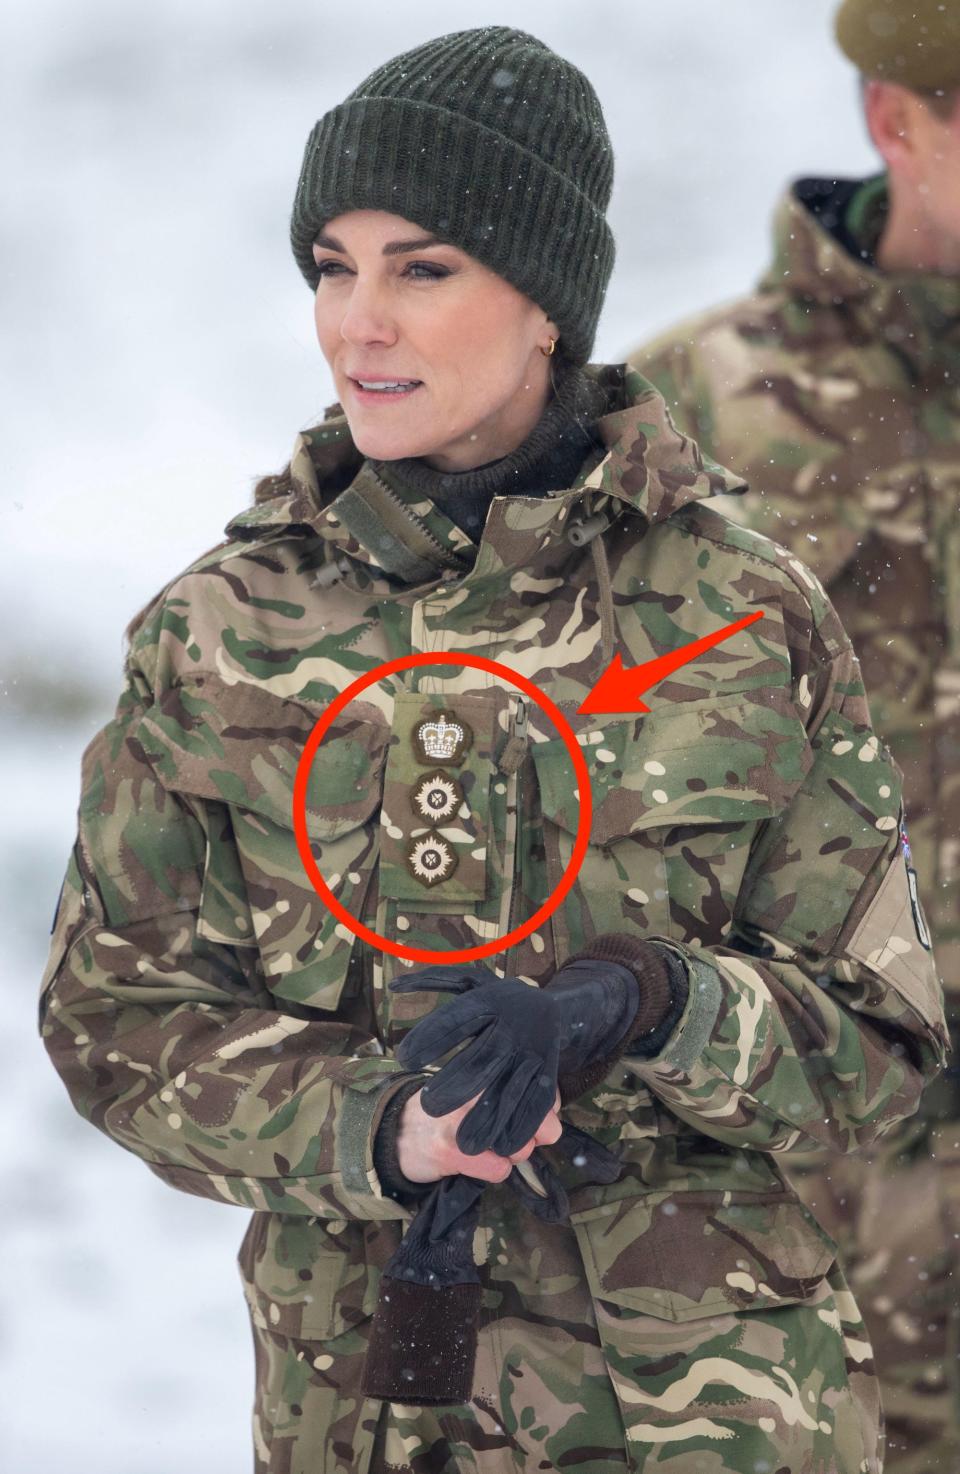 Kate Middleton wears camouflage in the snow. A red circle and arrow point to badges on her chest.